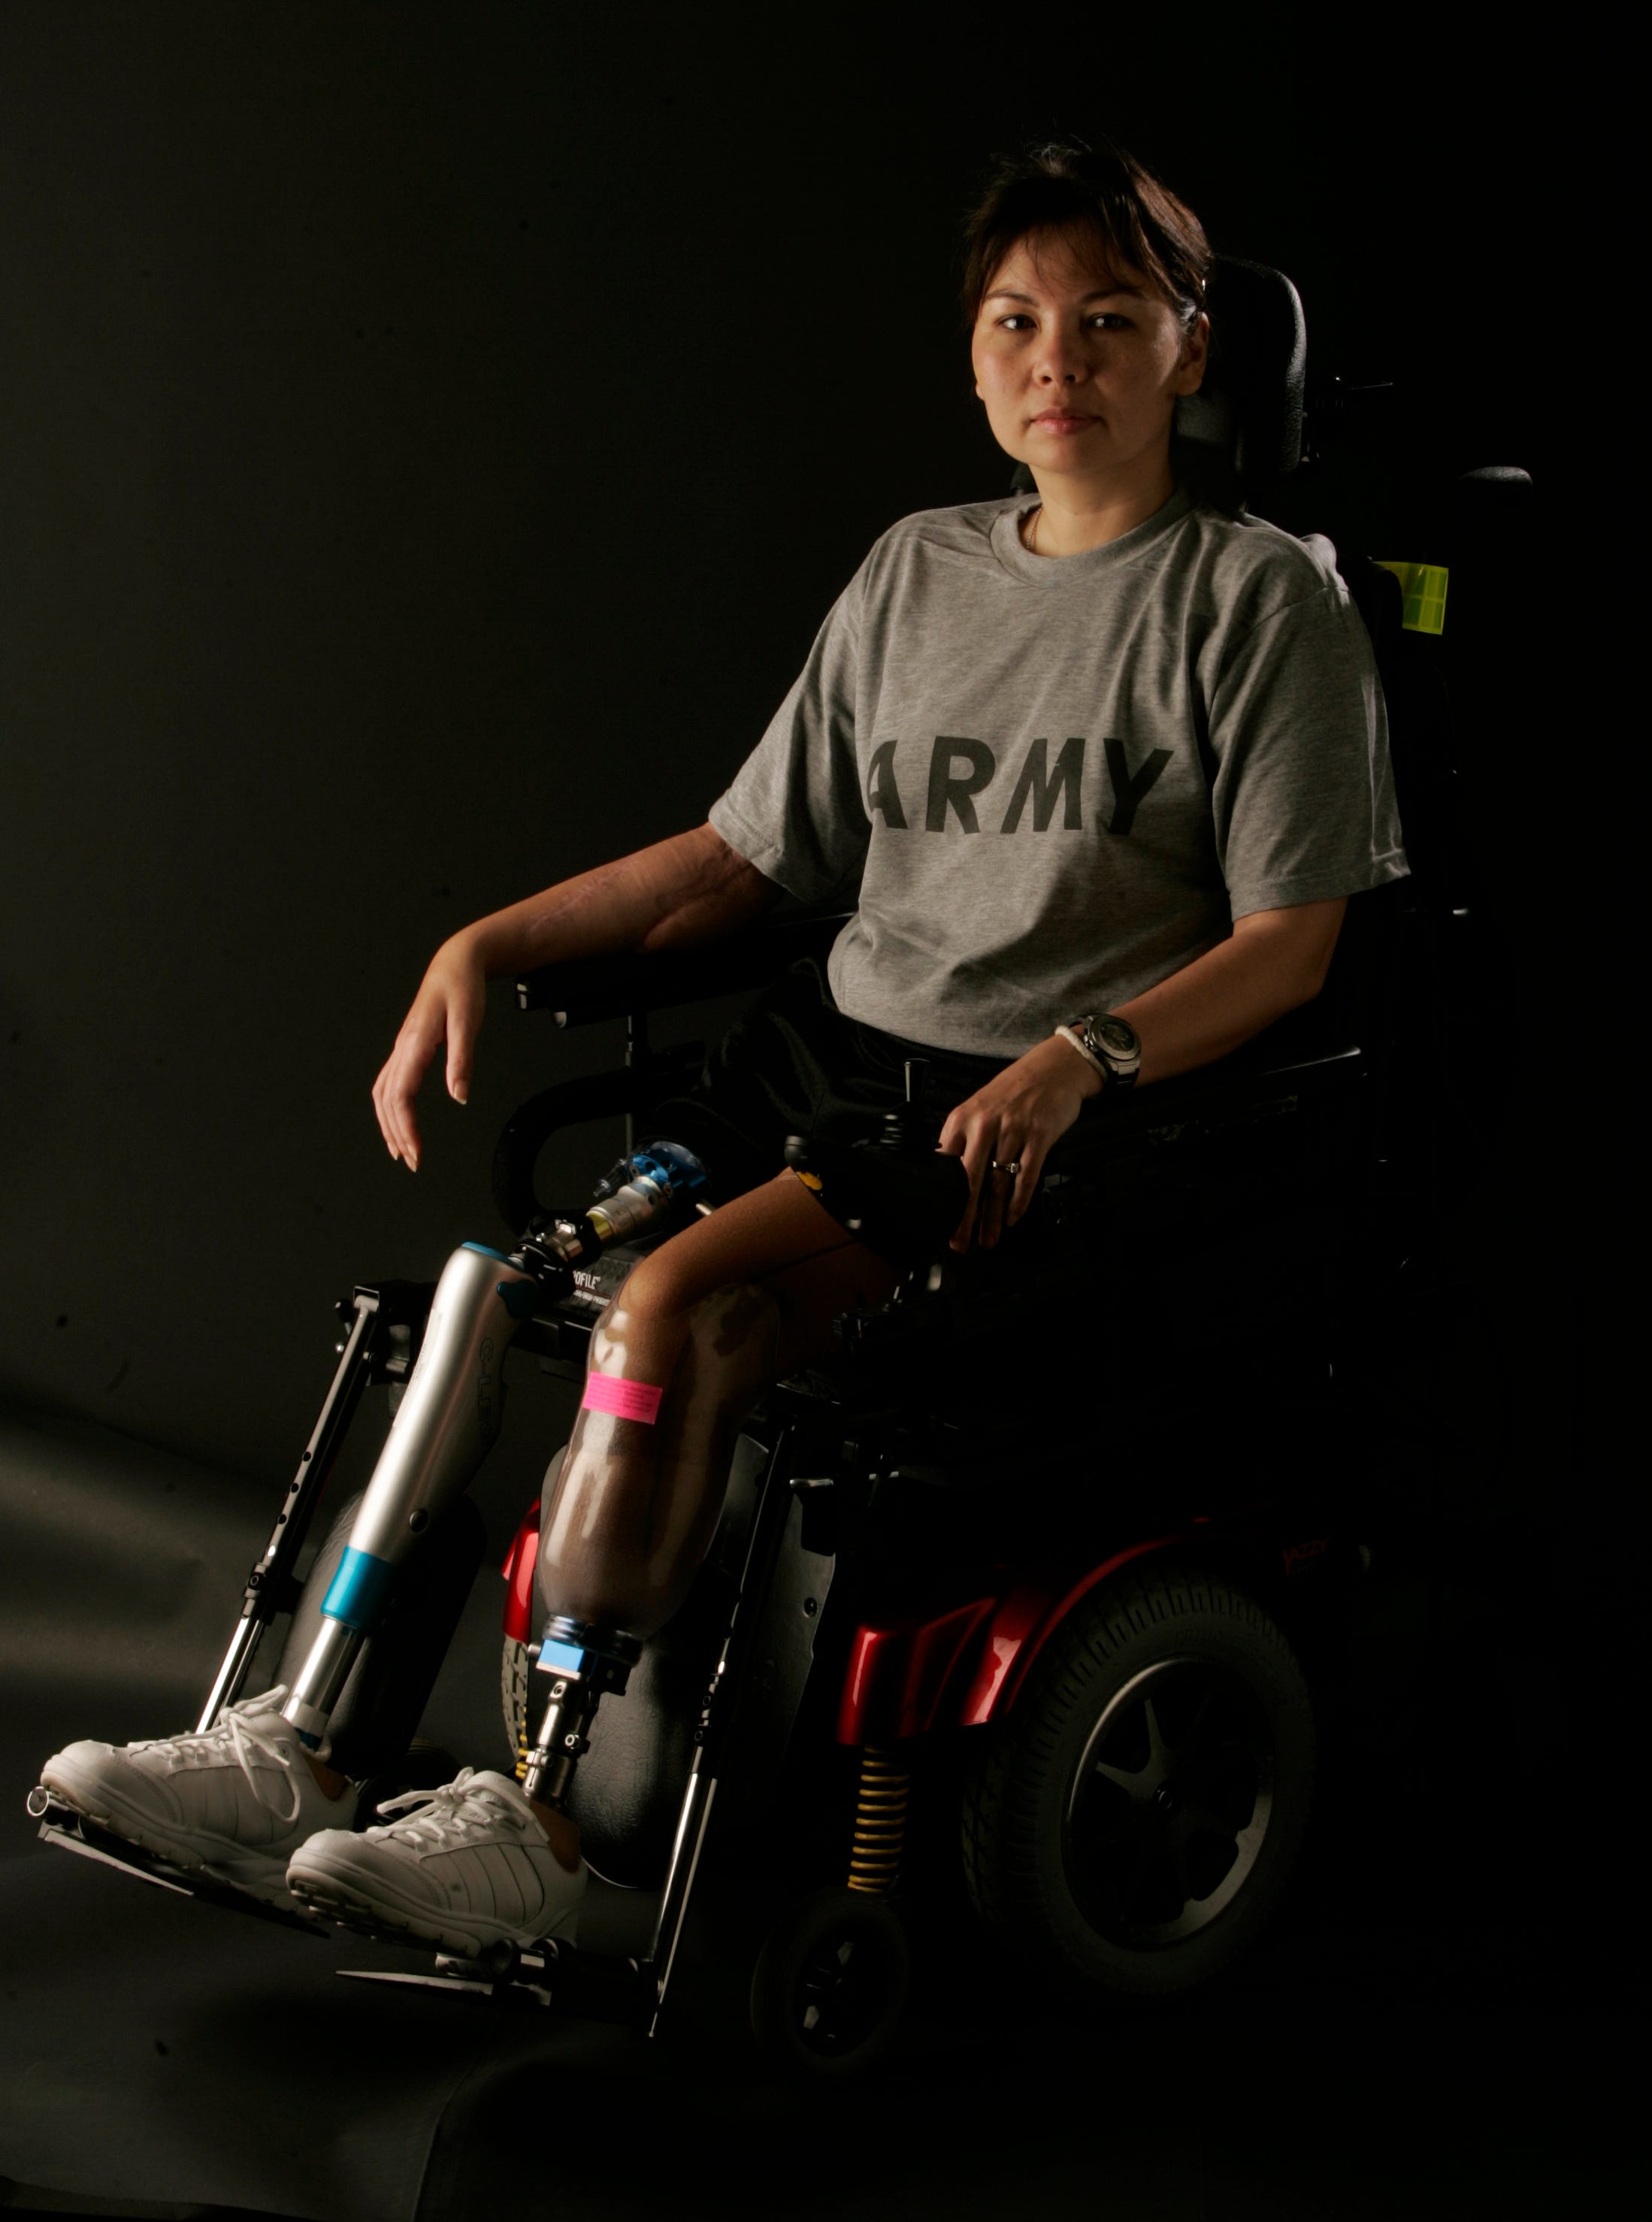 Tammy Duckworth was a Black Hawk helicopter pilot during the Iraq War when she was shot down by a rocket-propelled grenade. She lost both legs, and her right arm was severely wounded.